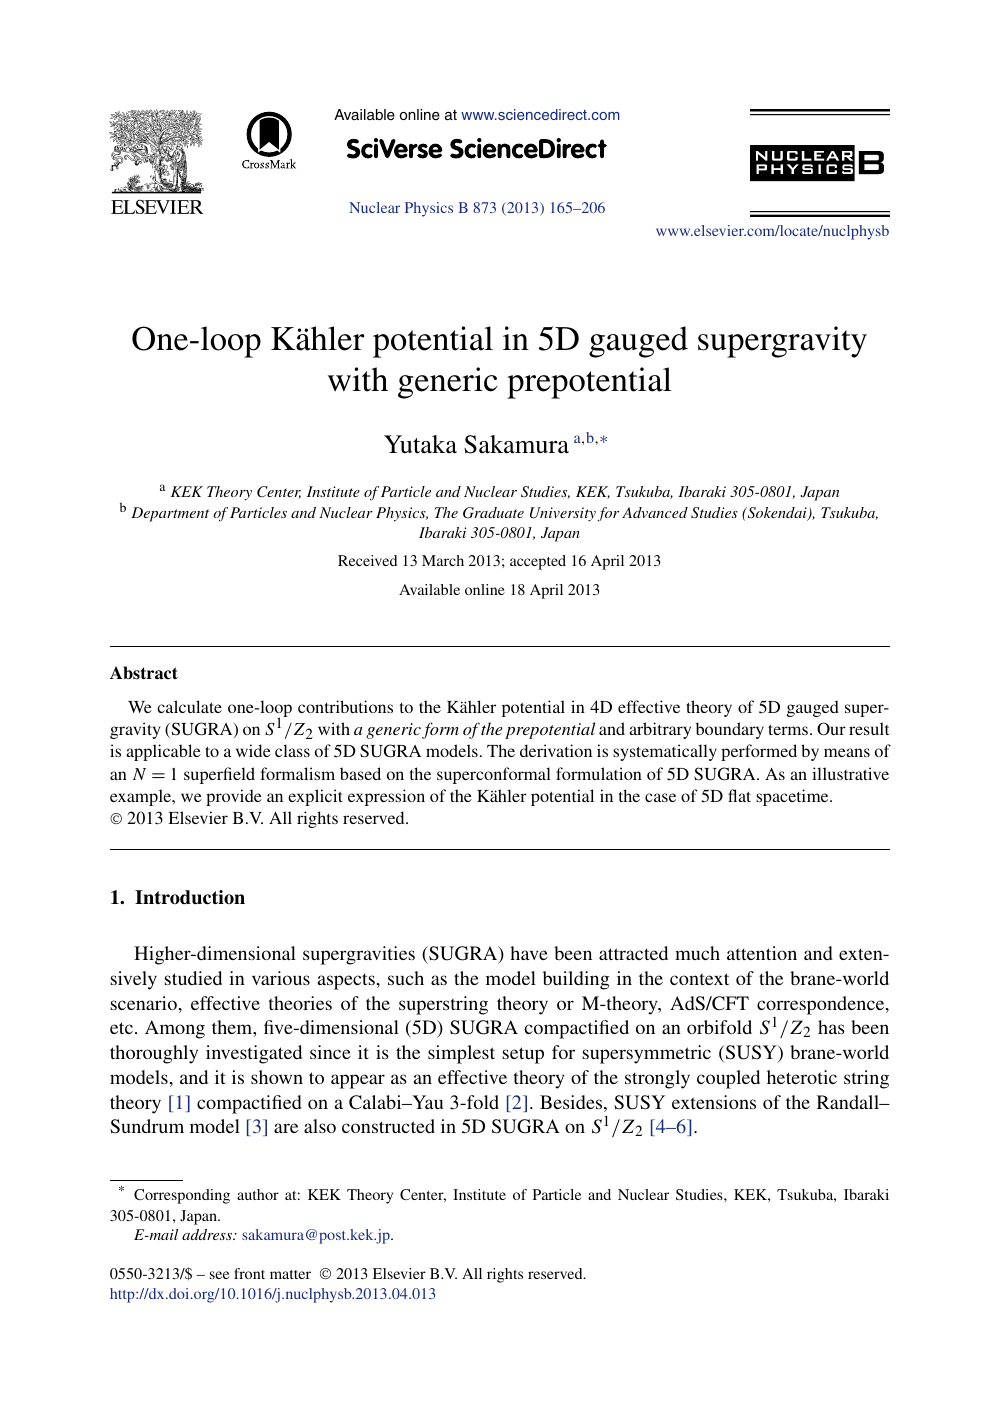 One Loop Kahler Potential In 5d Gauged Supergravity With Generic Prepotential Topic Of Research Paper In Physical Sciences Download Scholarly Article Pdf And Read For Free On Cyberleninka Open Science Hub